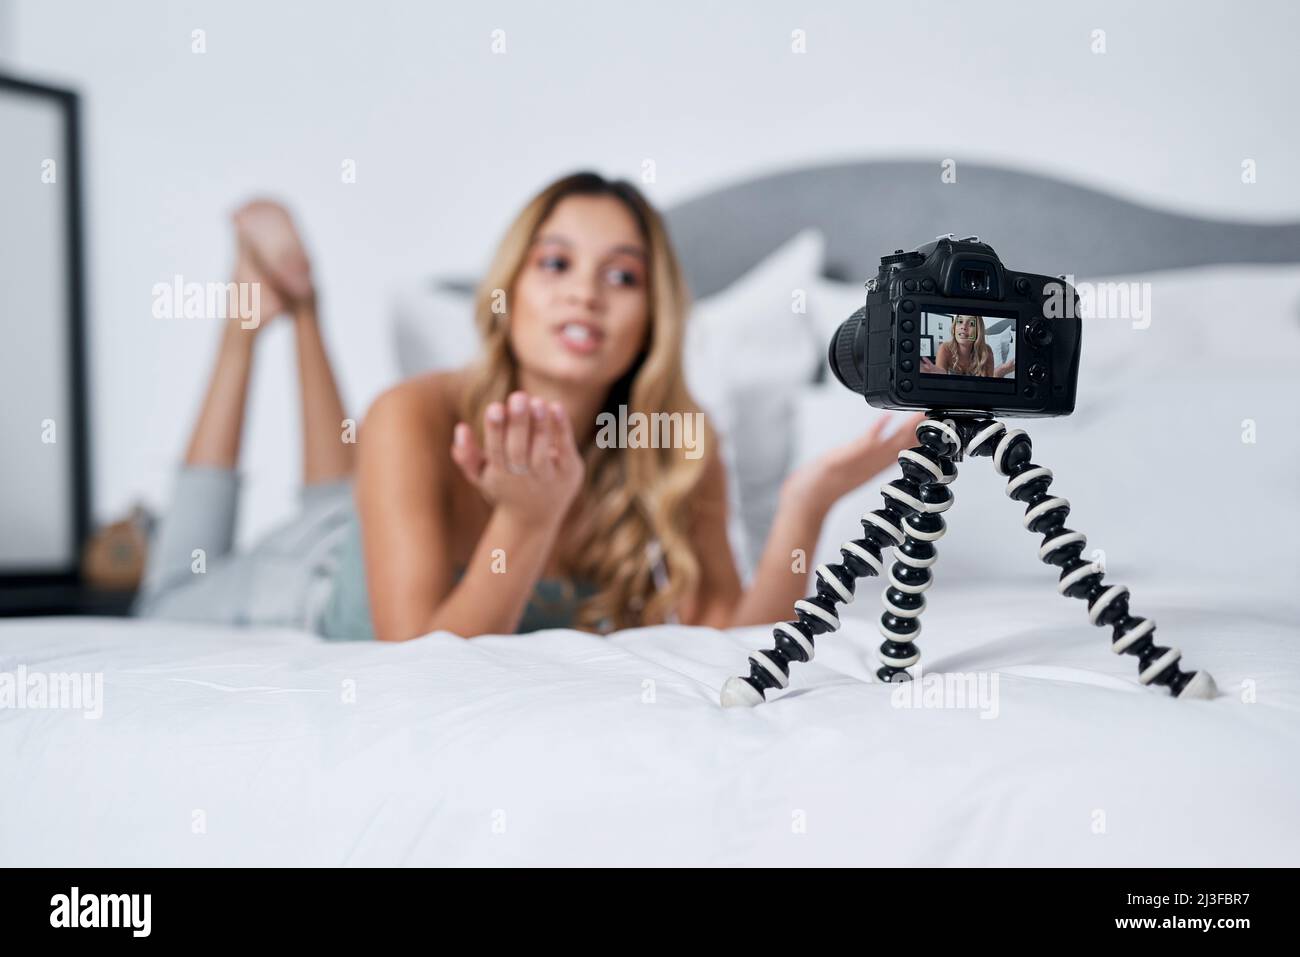 Today Im sharing a little bit more about myself. Shot of a young woman using a tripod while recording herself at home. Stock Photo